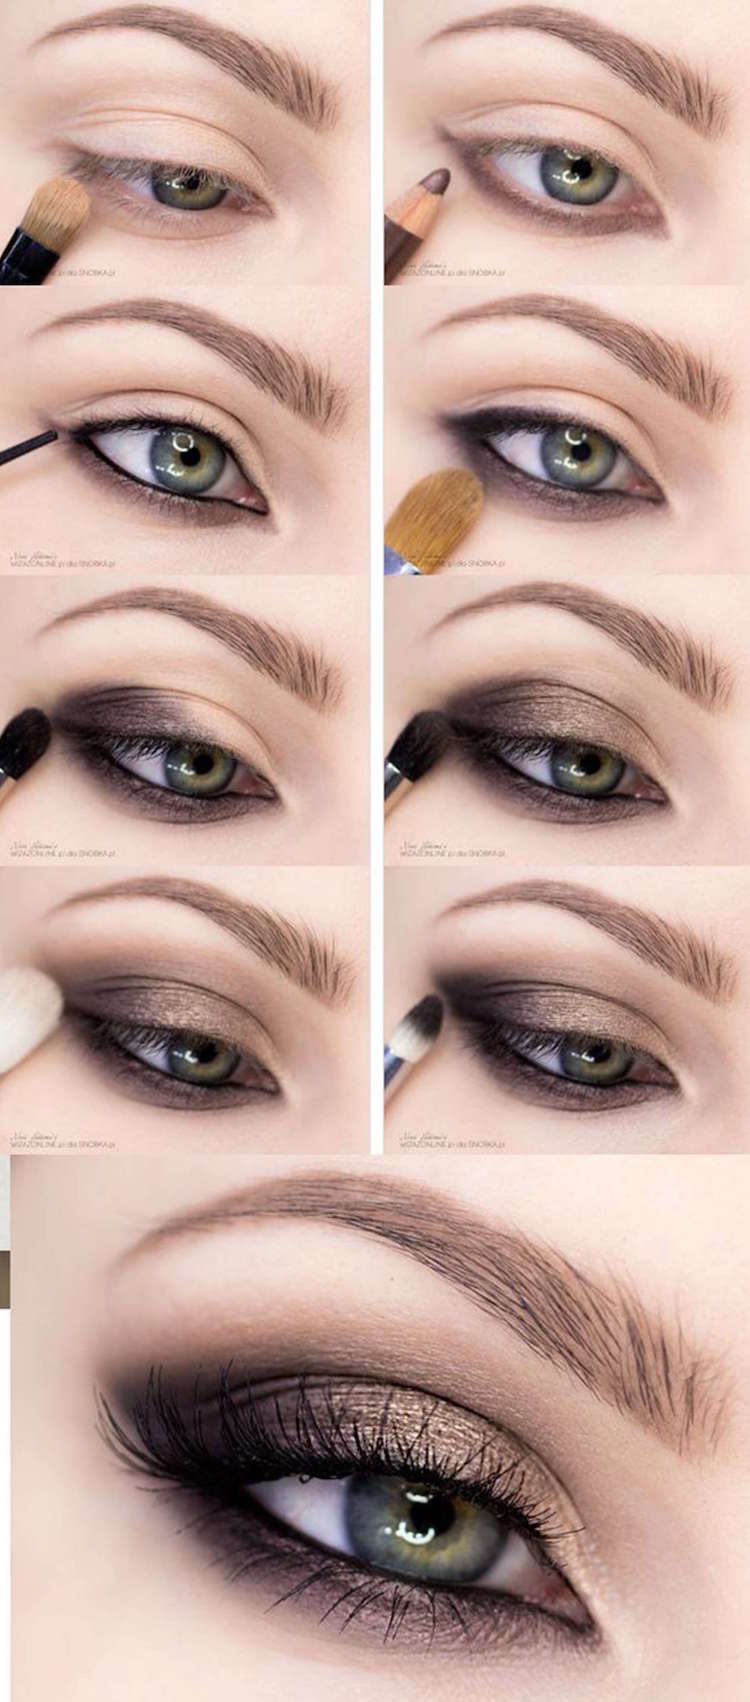 maquillage smoky eyes yeux verts